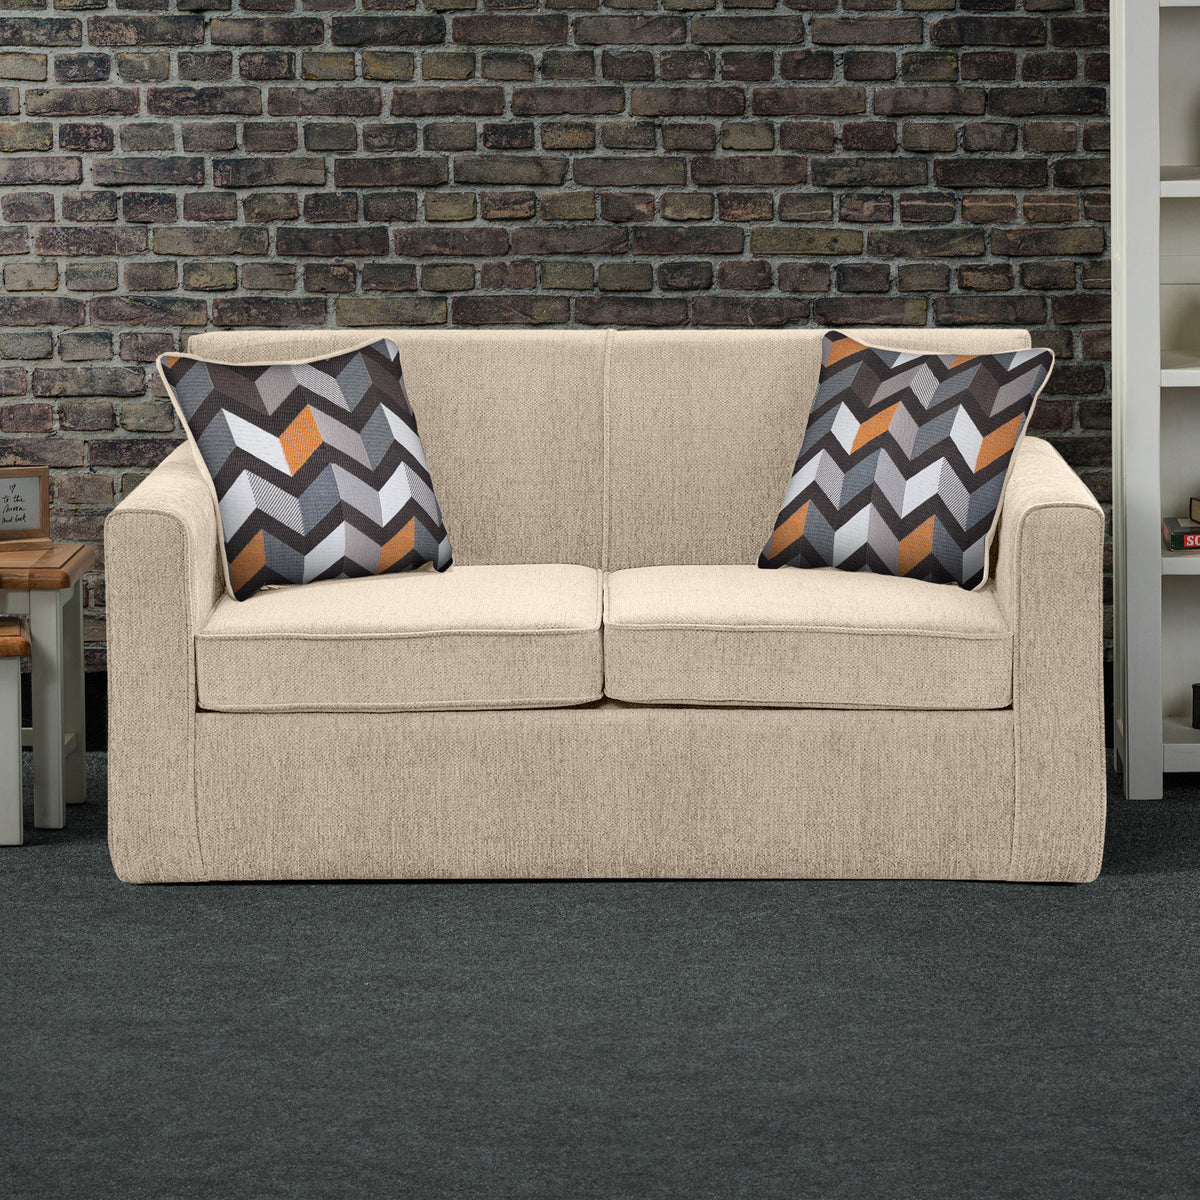 Bawtry Oatmeal Faux Linen 2 Seater Sofabed with Charcoal Scatter Cushions from Roseland Furniture